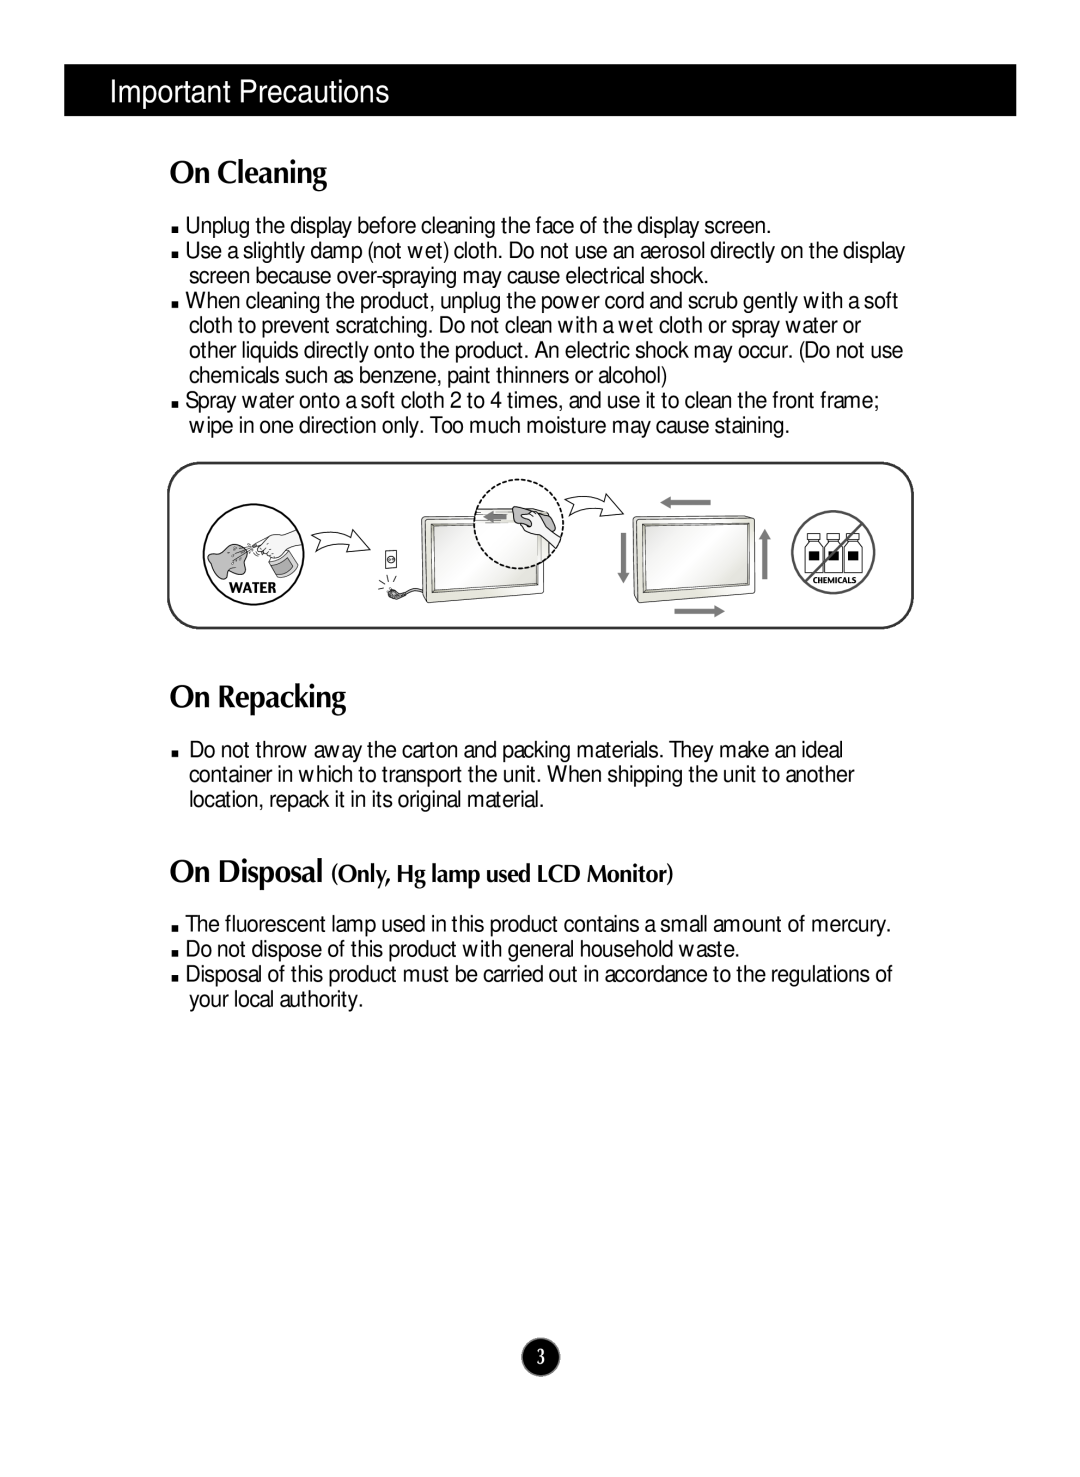 LG Electronics W2286L, W2486L On Cleaning, On Repacking, On Disposal Only, Hg lamp used LCD Monitor, Important Precautions 